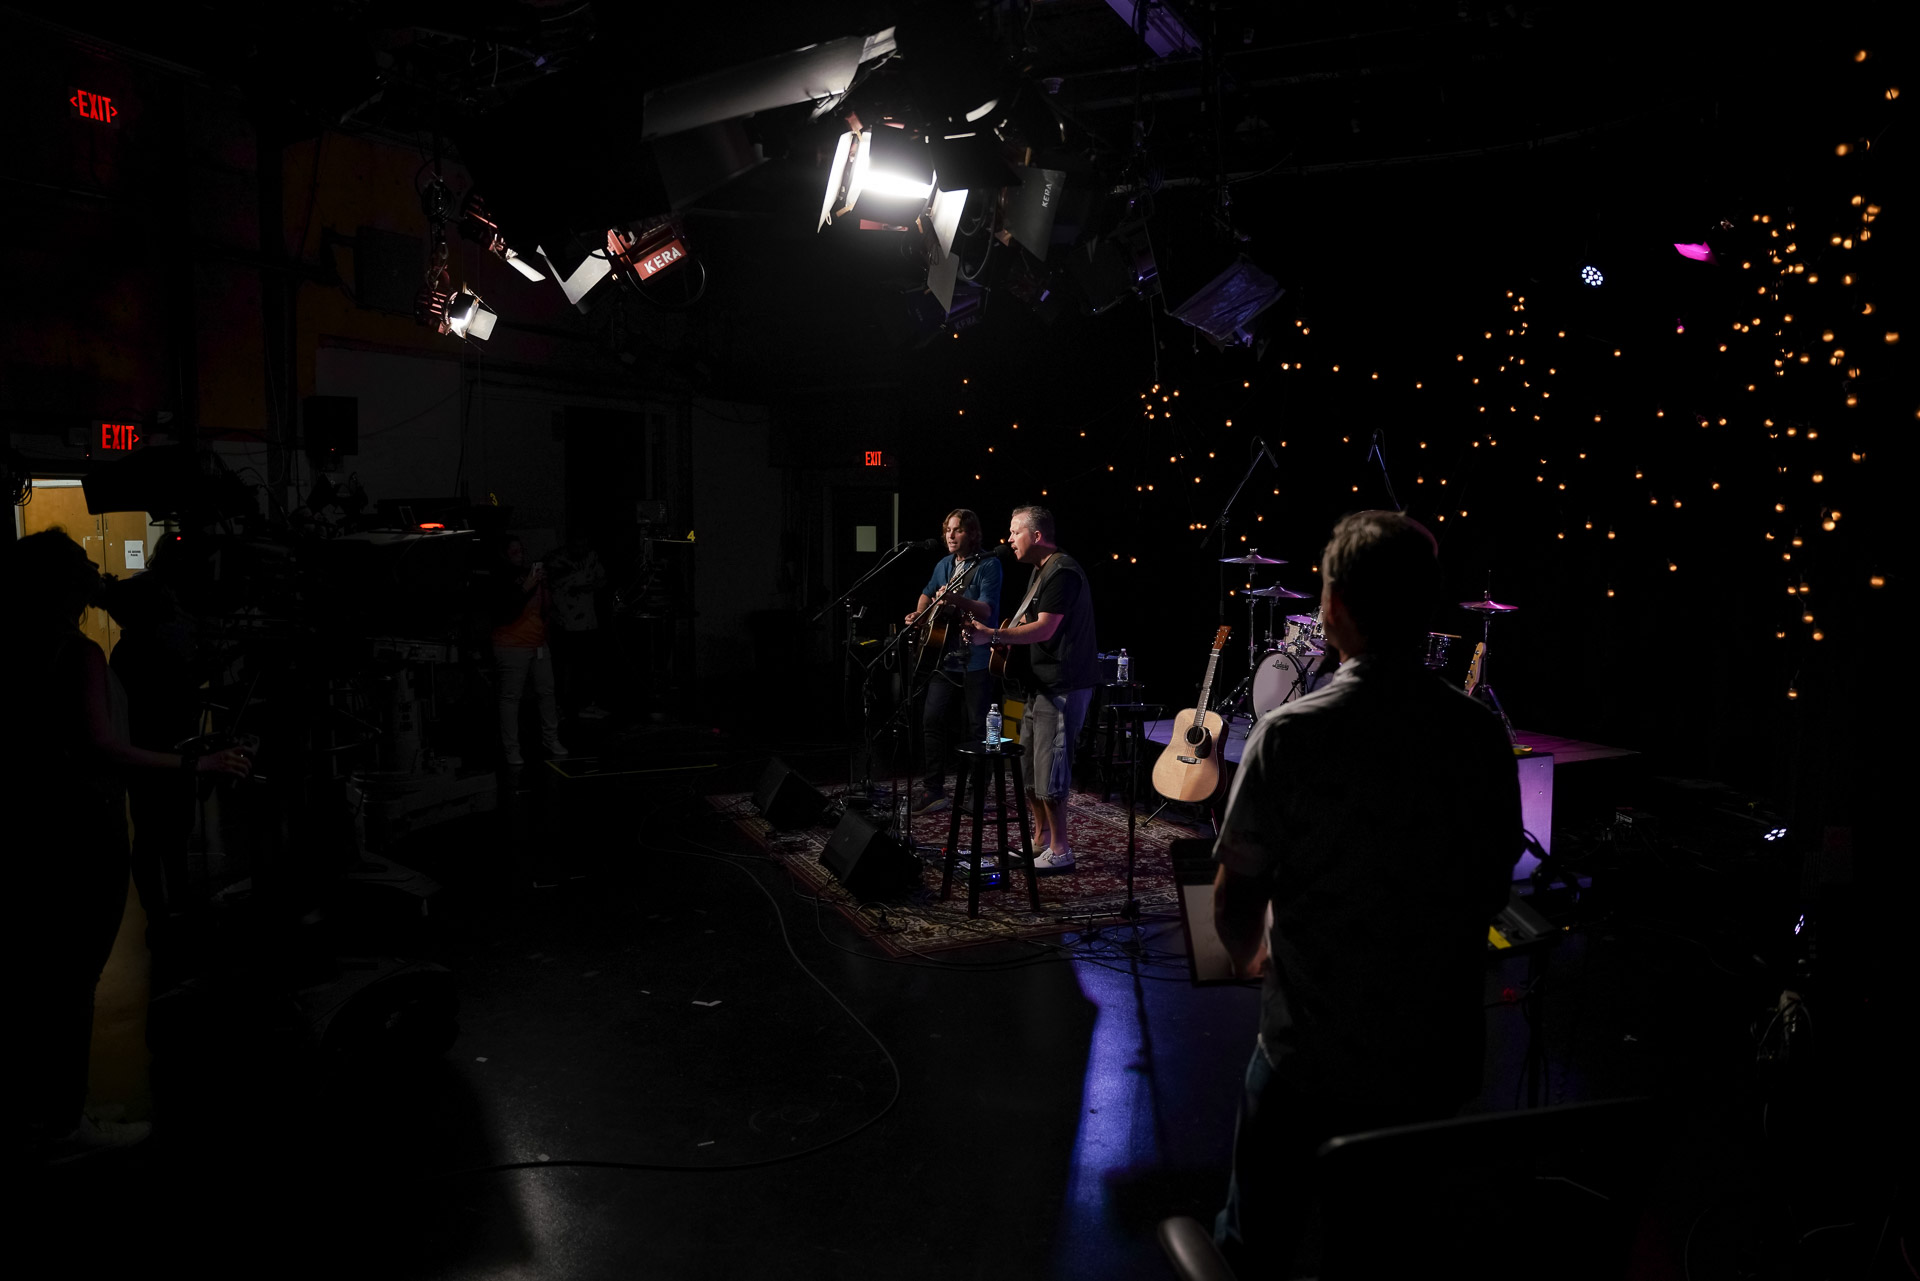 A large studio with cameras pointed at two men performing music